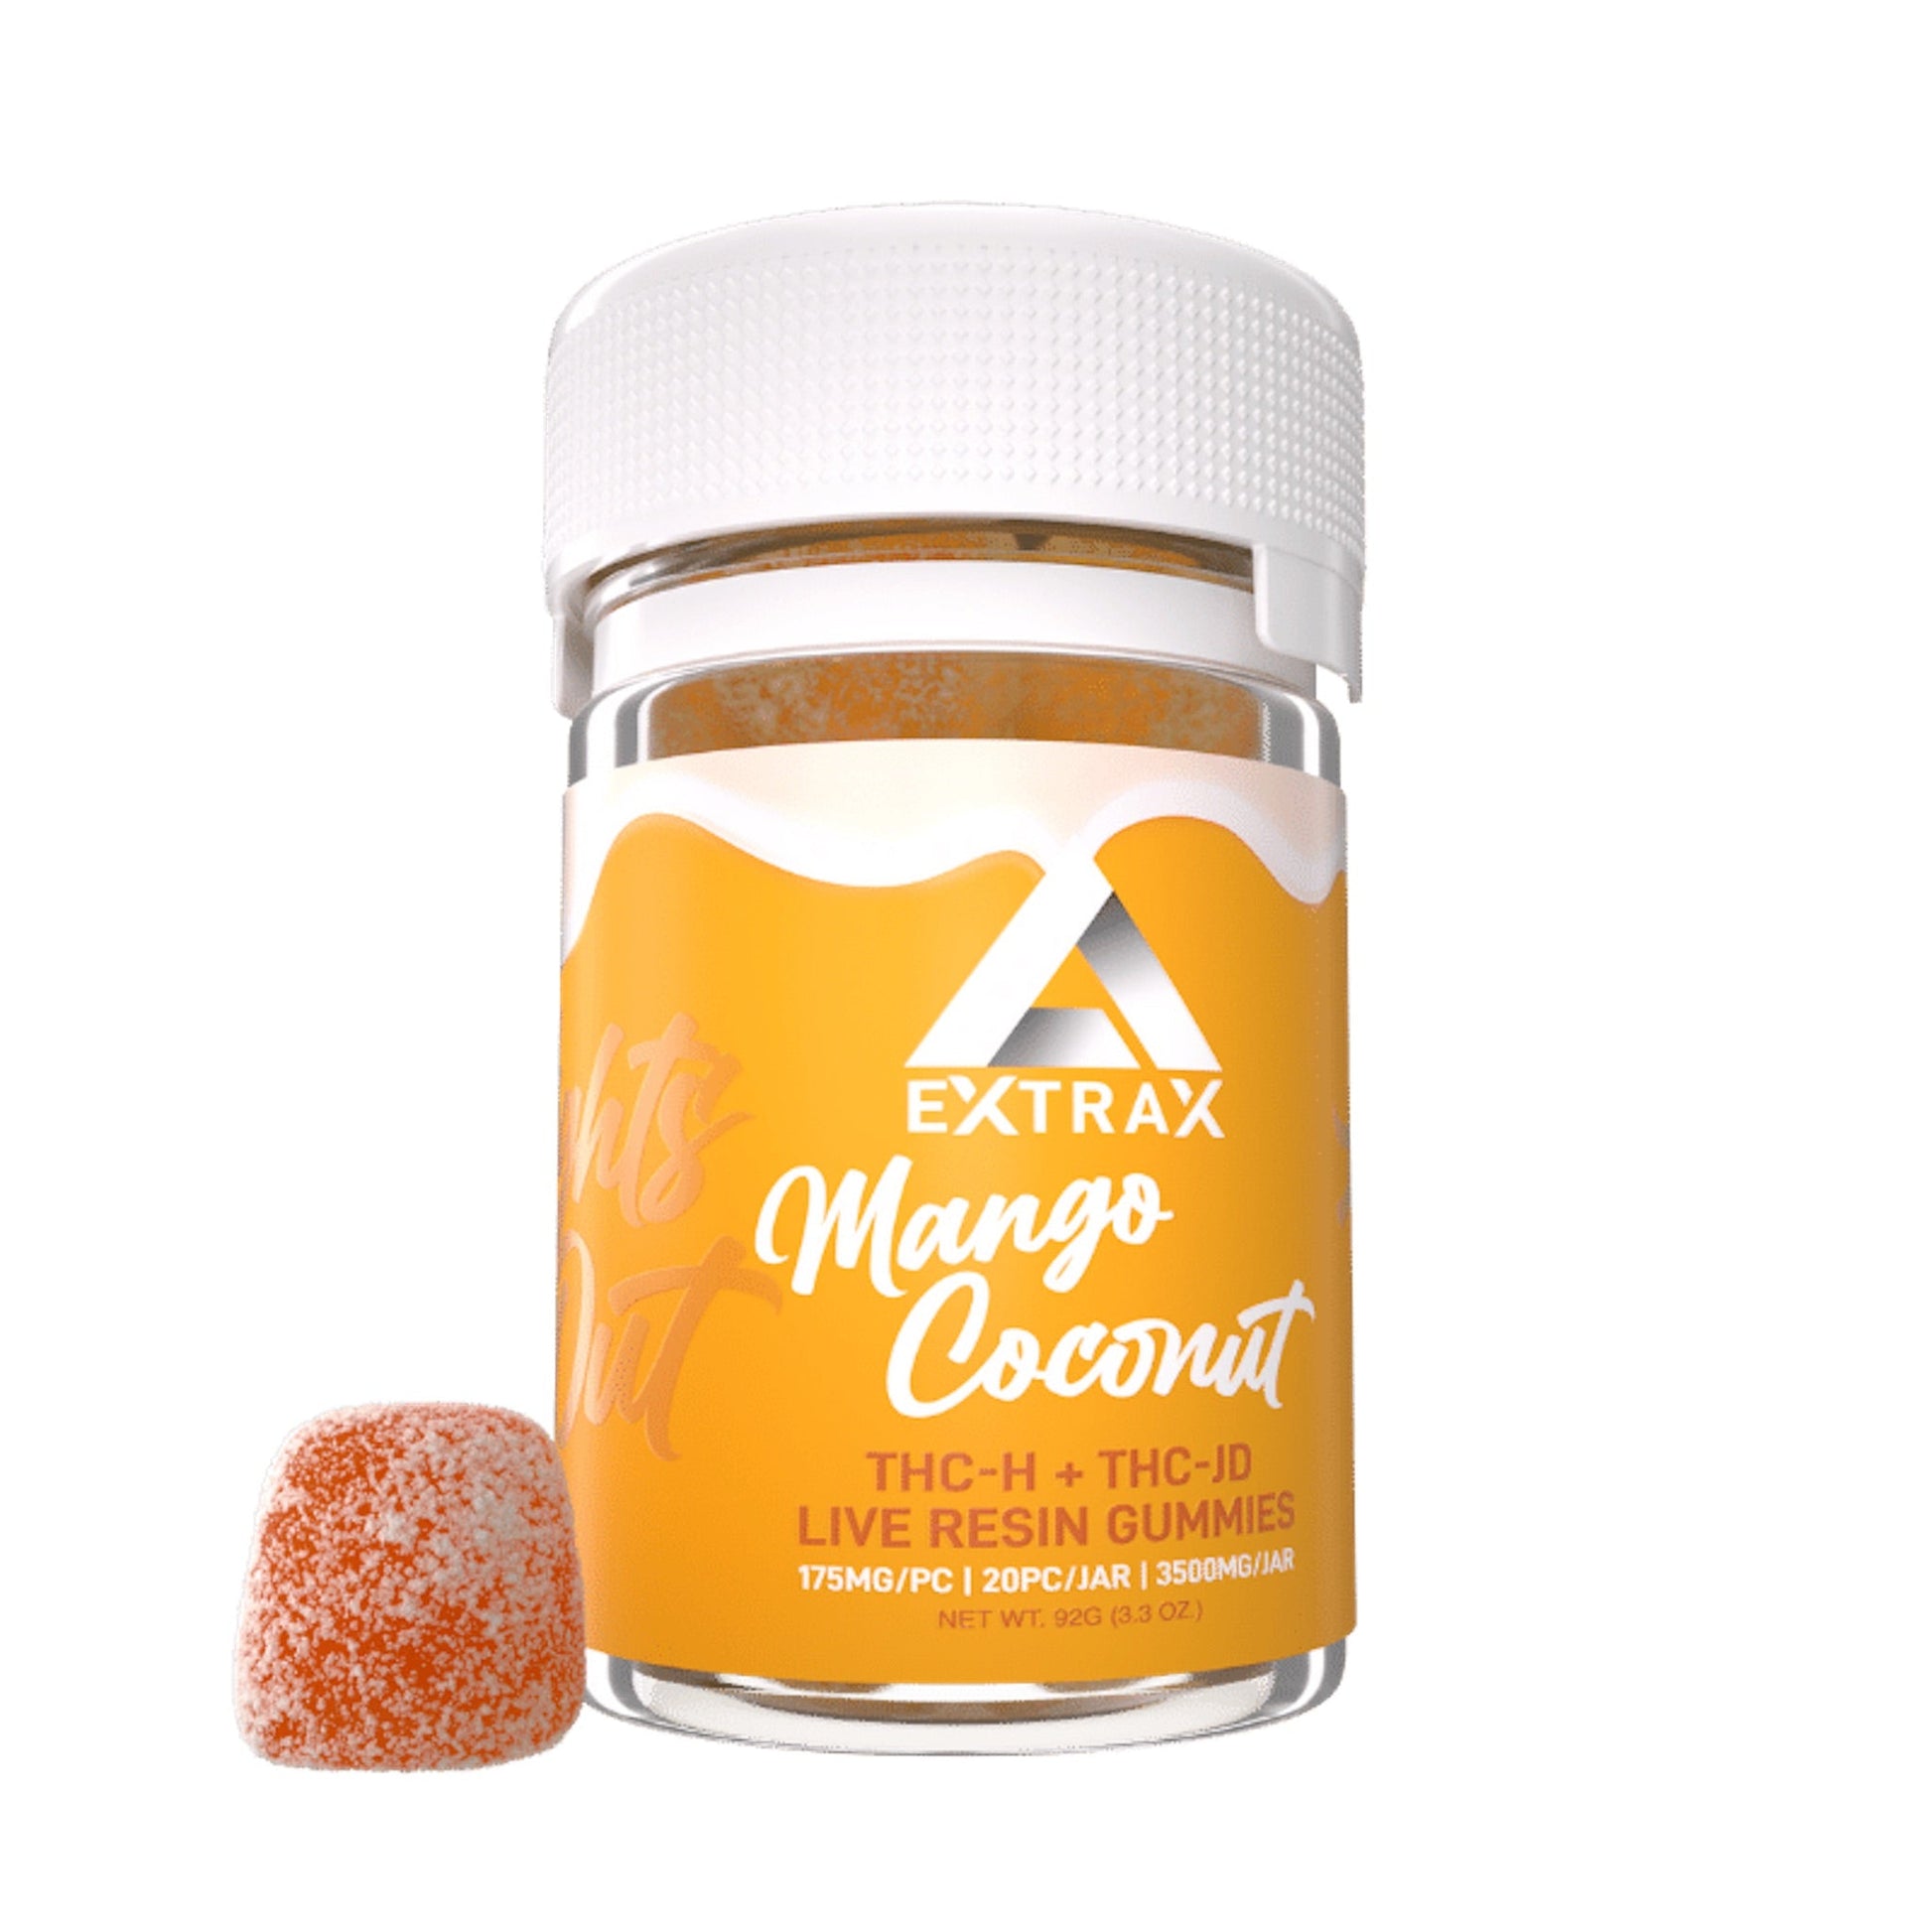 Extrax Lights Out THCh + THCjd Gummies Mango Coconut